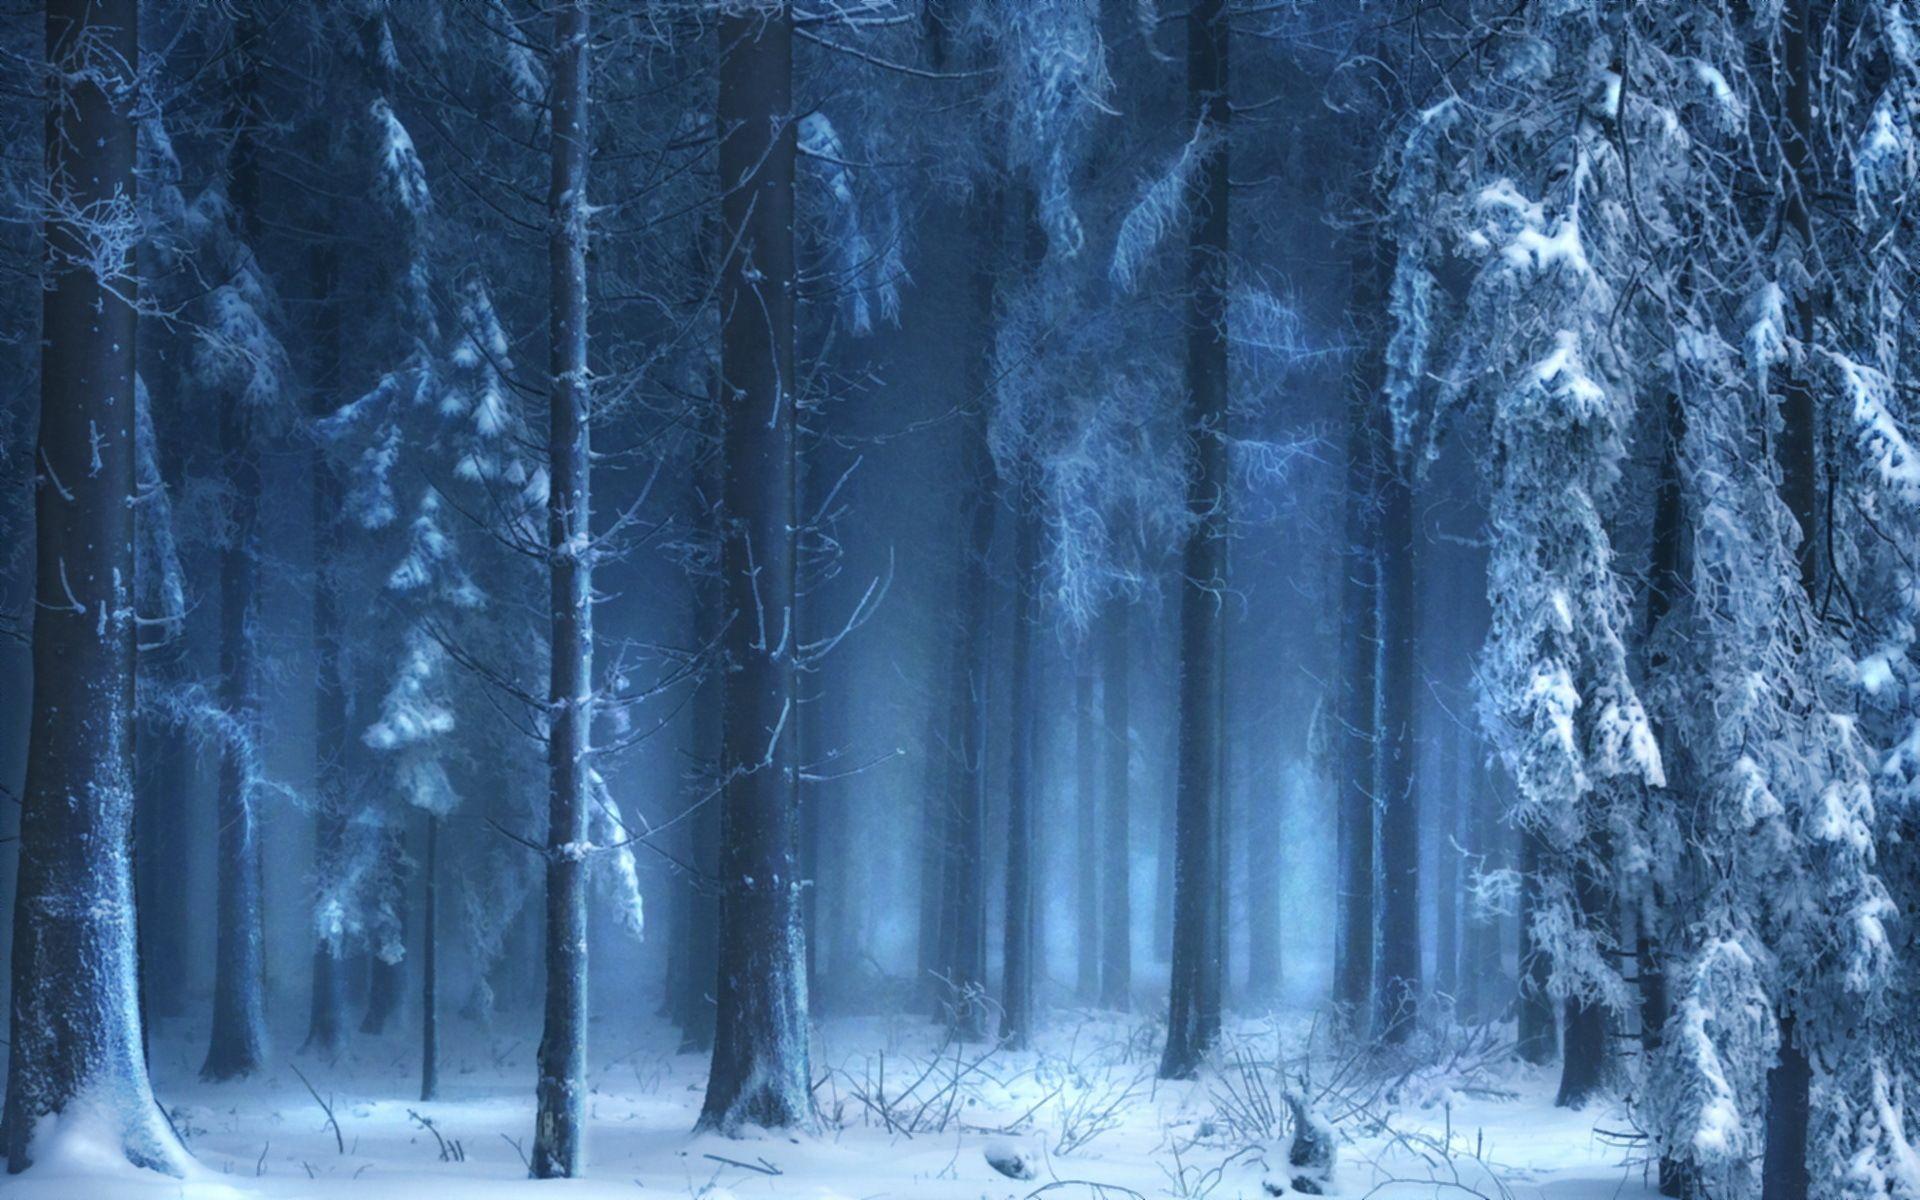 Landscapes trees forest woods winter snow wallpaperx1200. Winter snow wallpaper, Winter wallpaper, Forest wallpaper